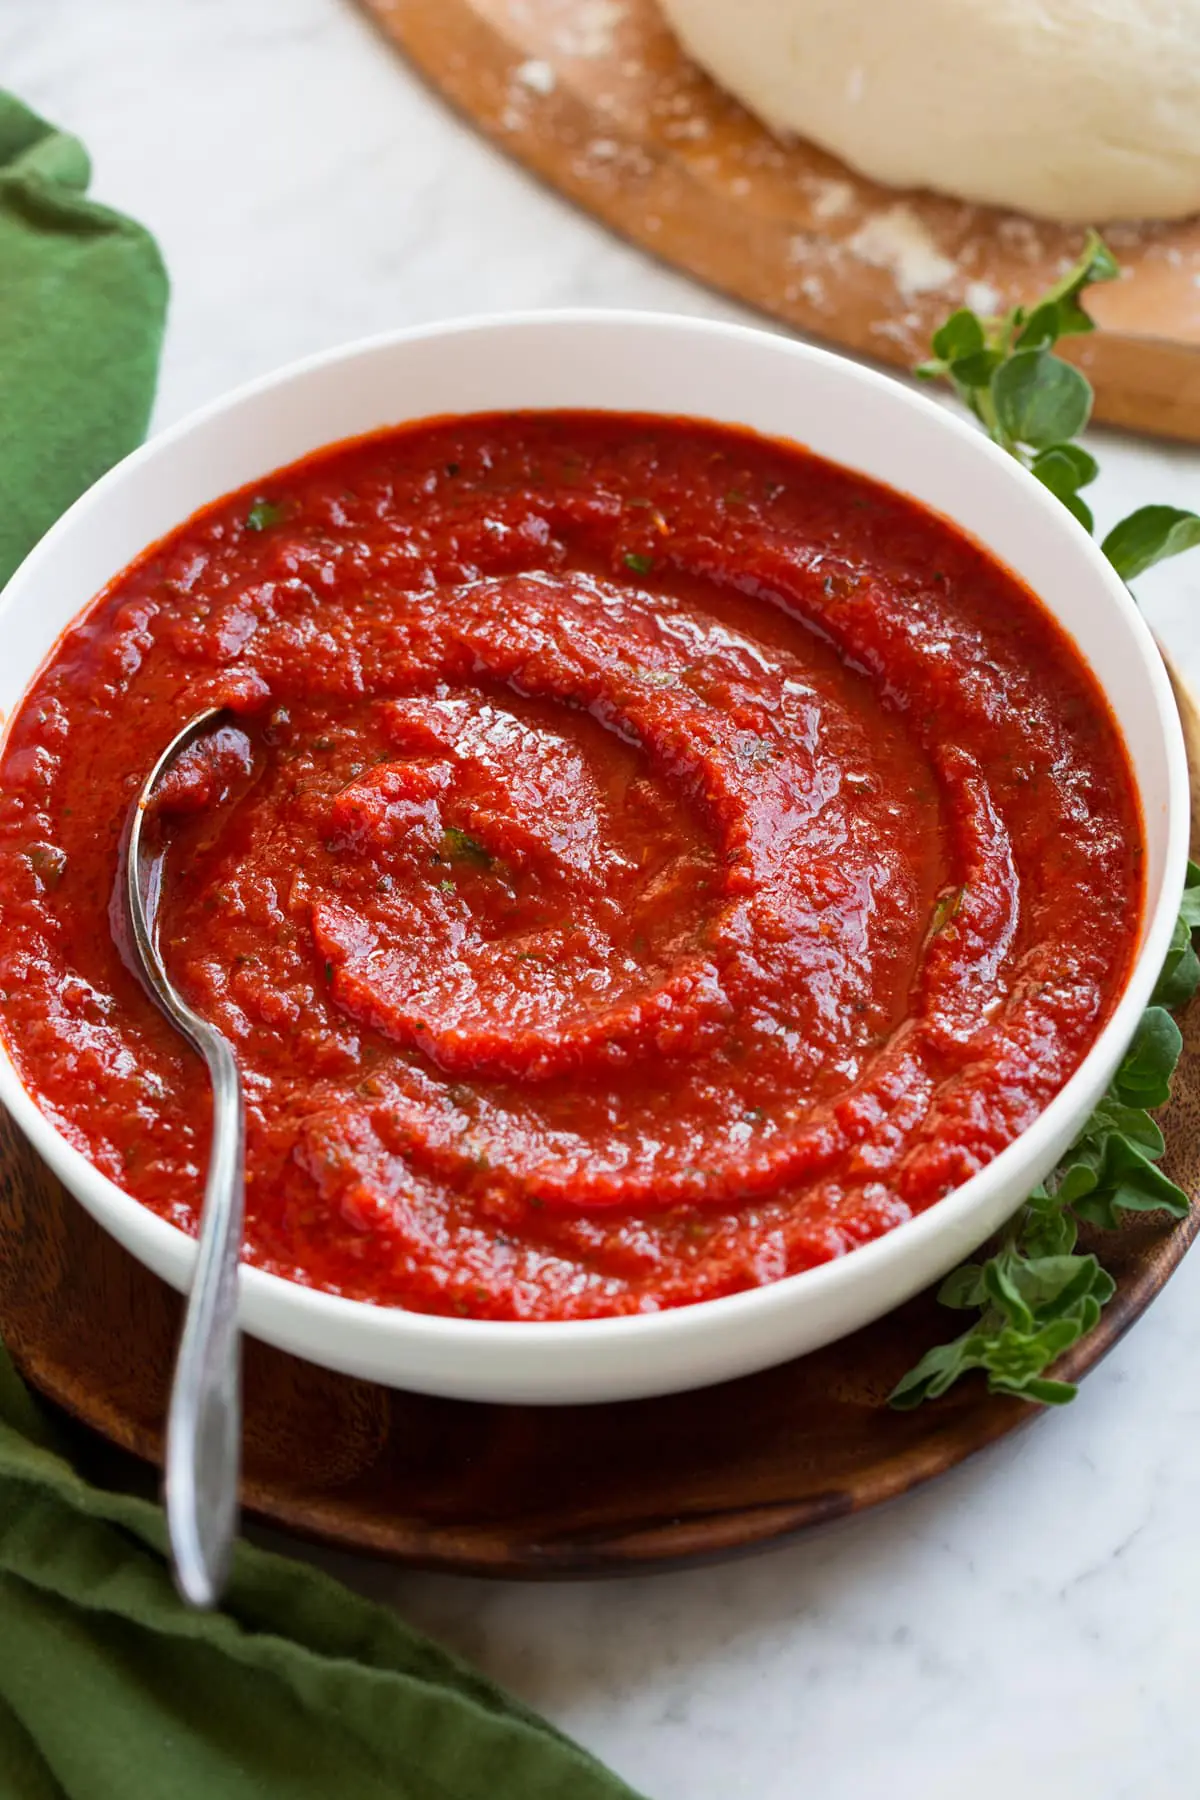 How to Make Pizza Sauce from Tomato Paste